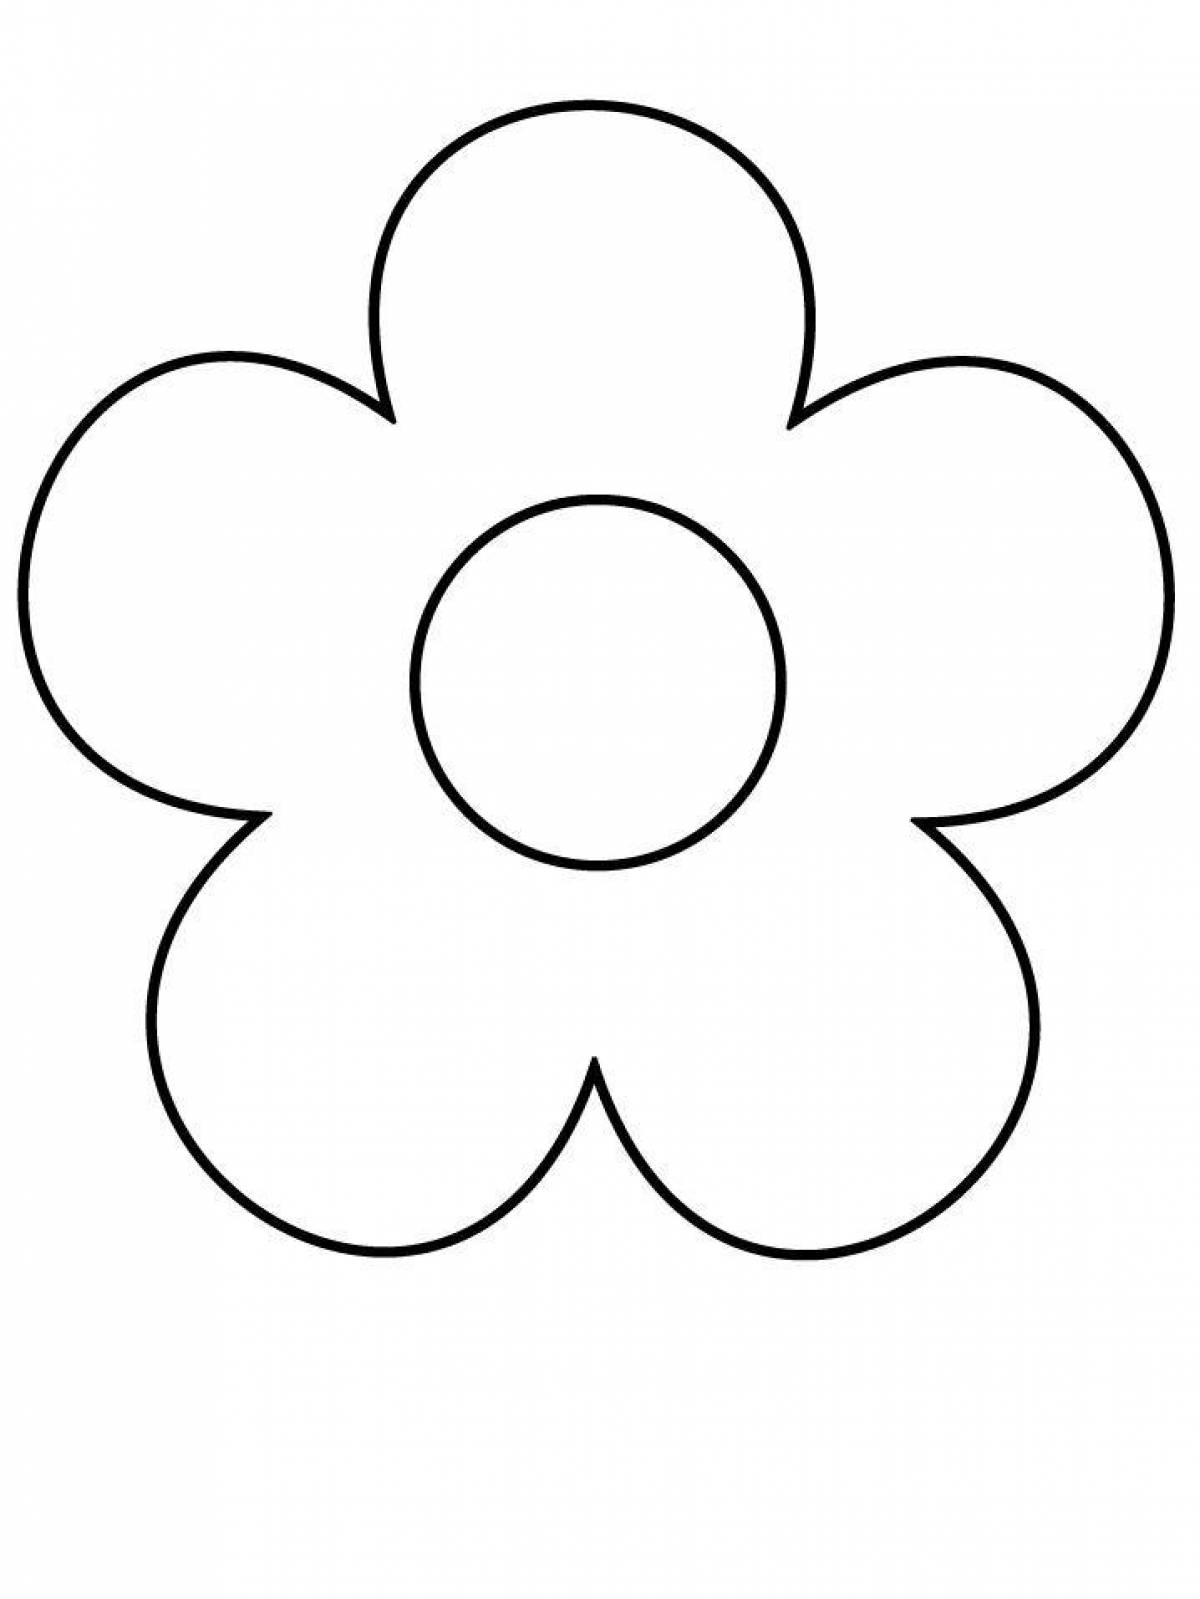 Wonderful coloring flower picture for kids